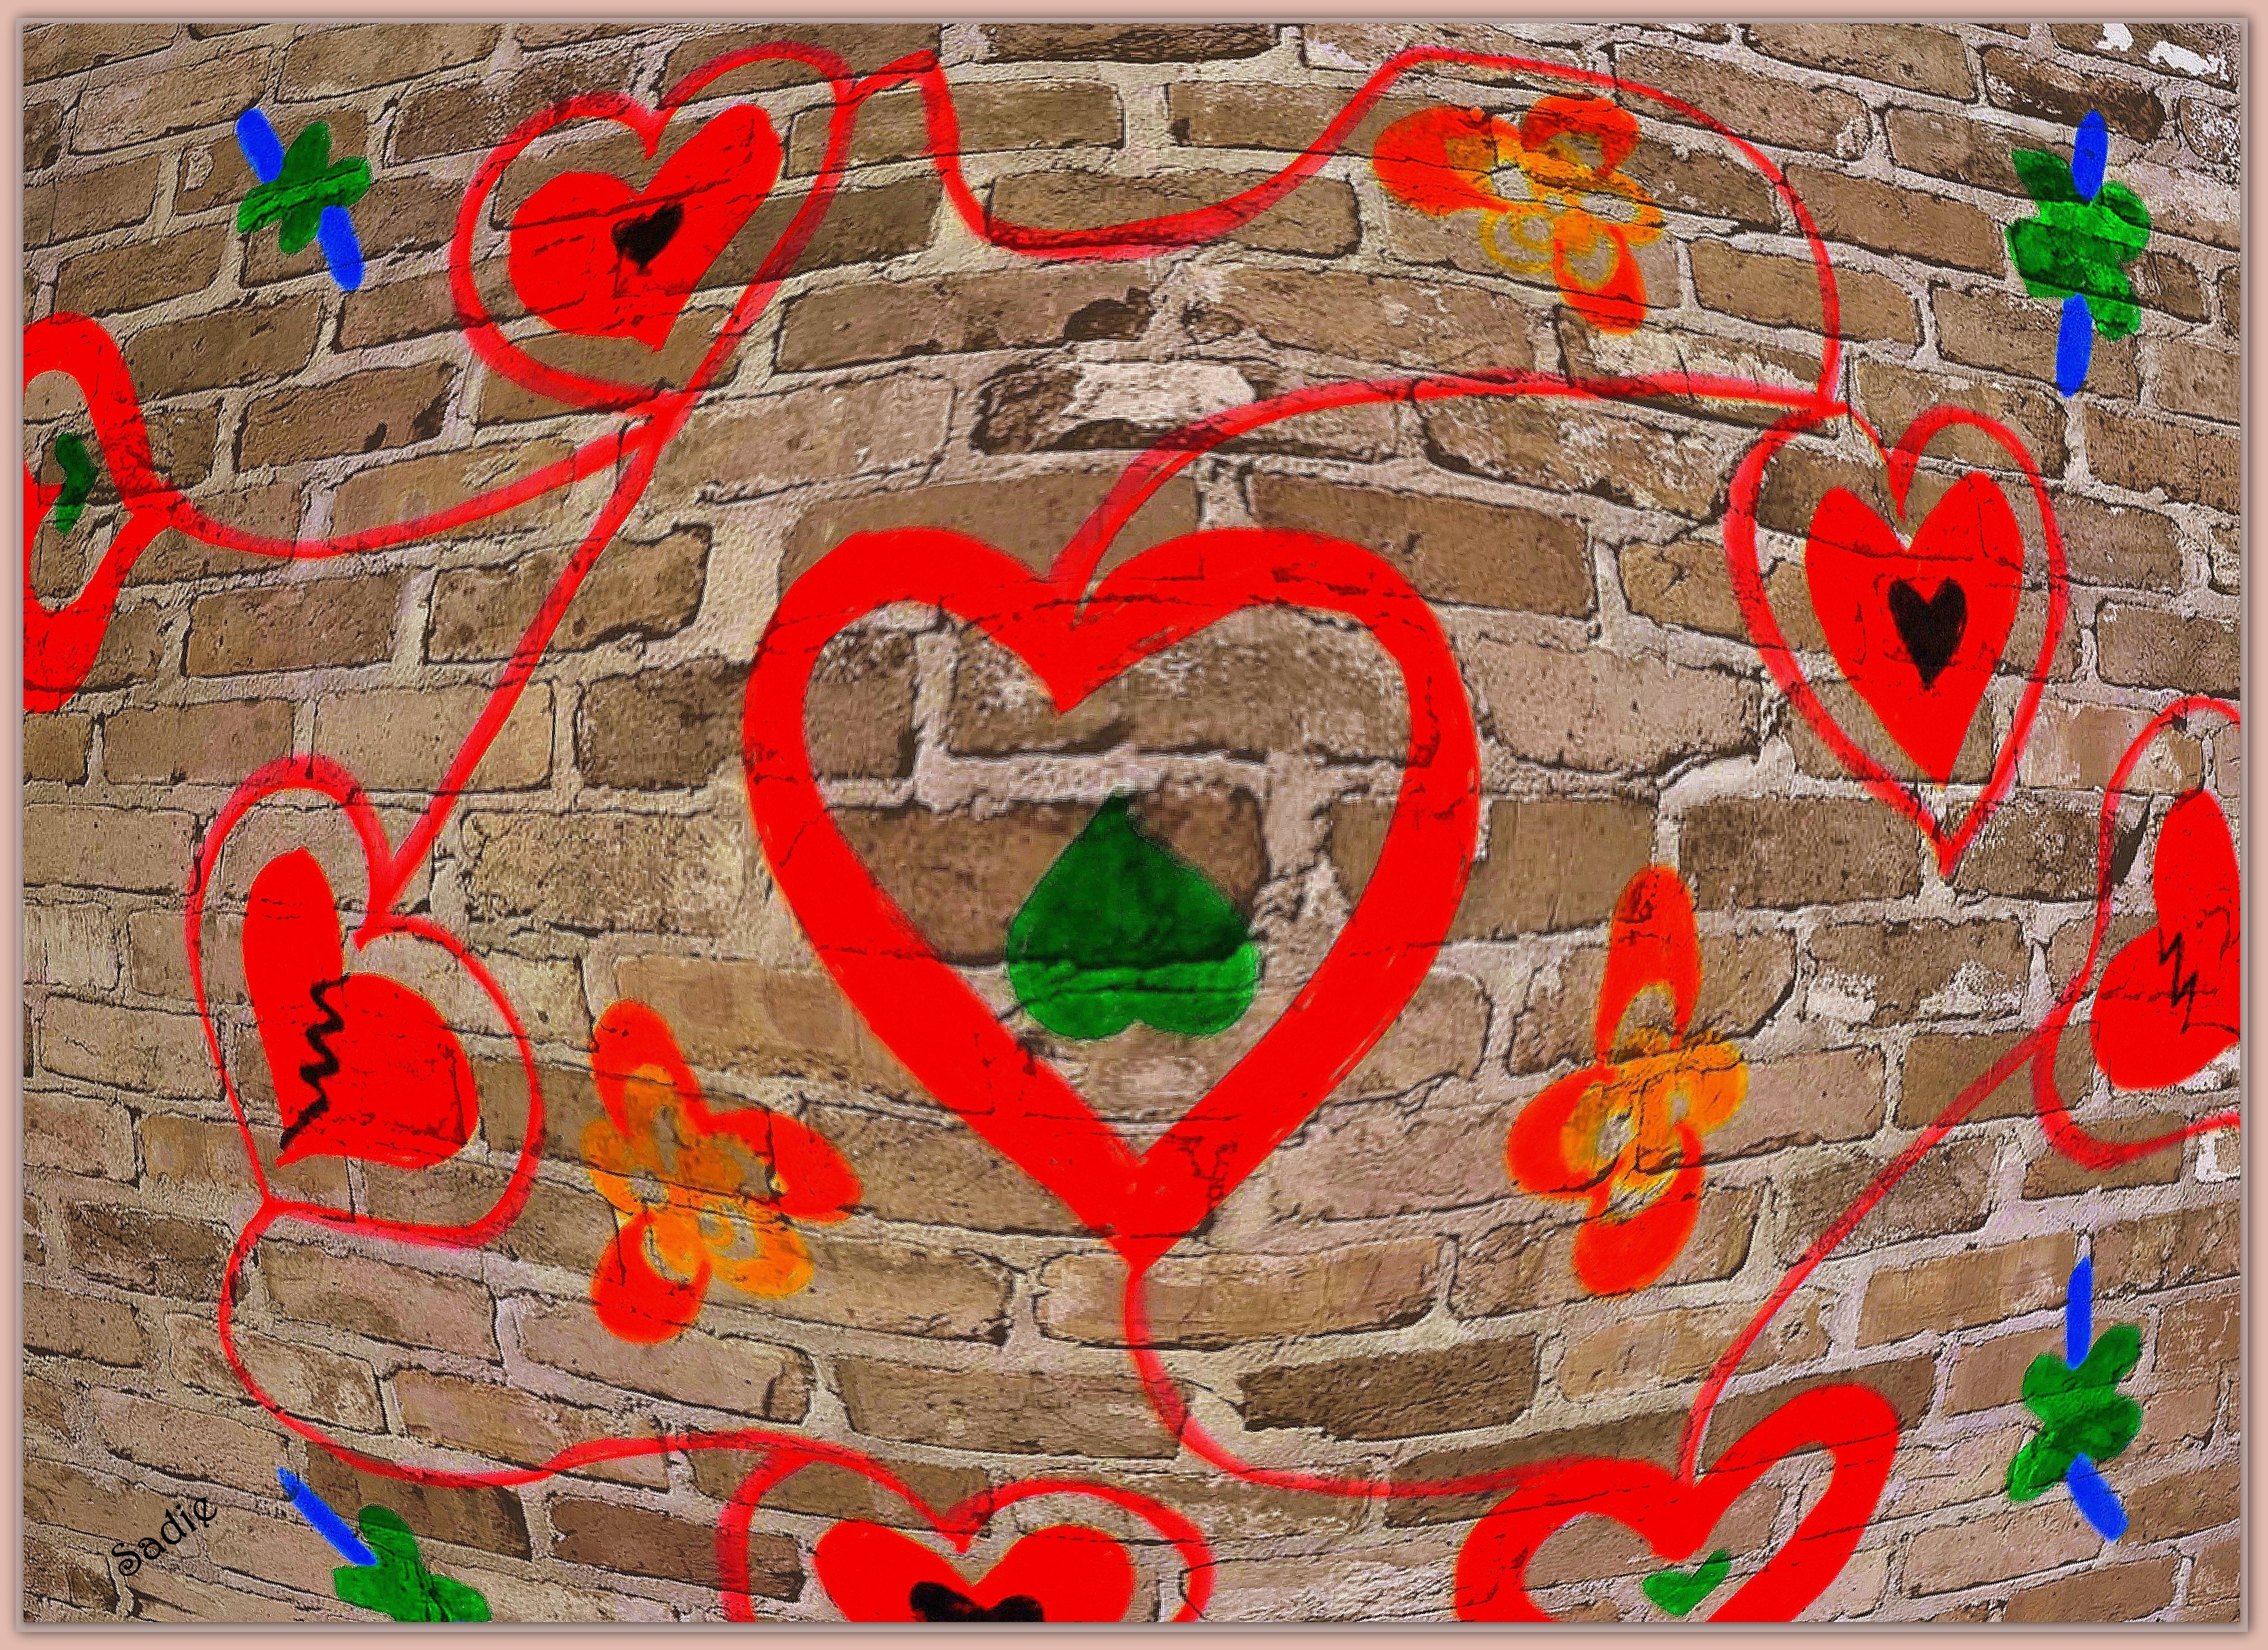 red green orange and blue flower and heart graffiti